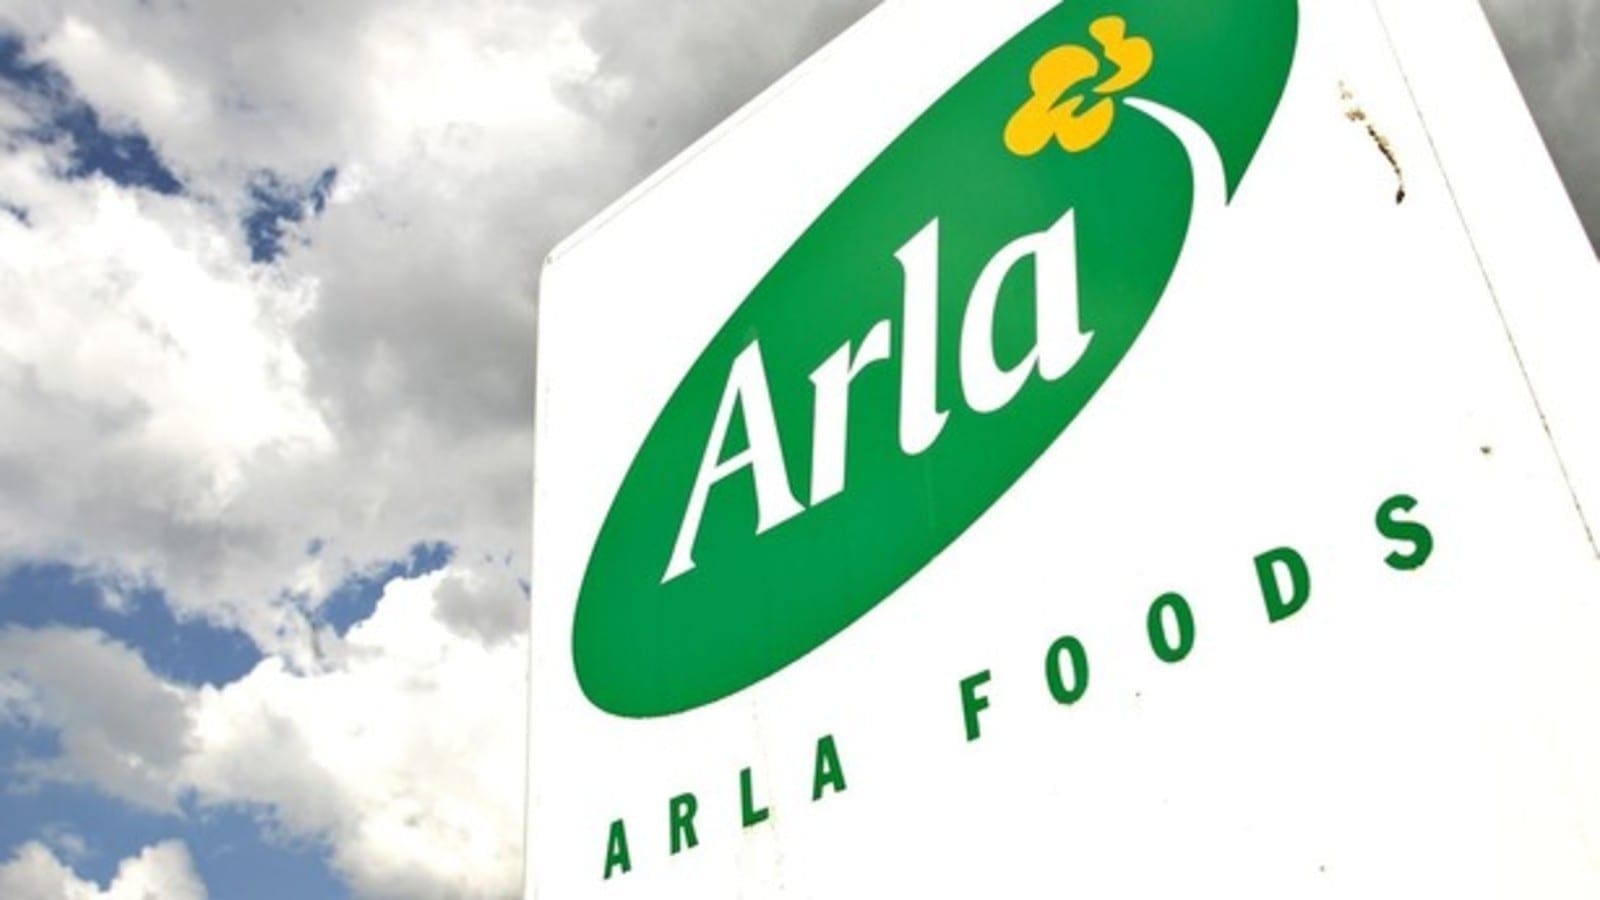 Arla Foods bolsters net-zero campaign with new US$4.6B investment in sustainable dairy production